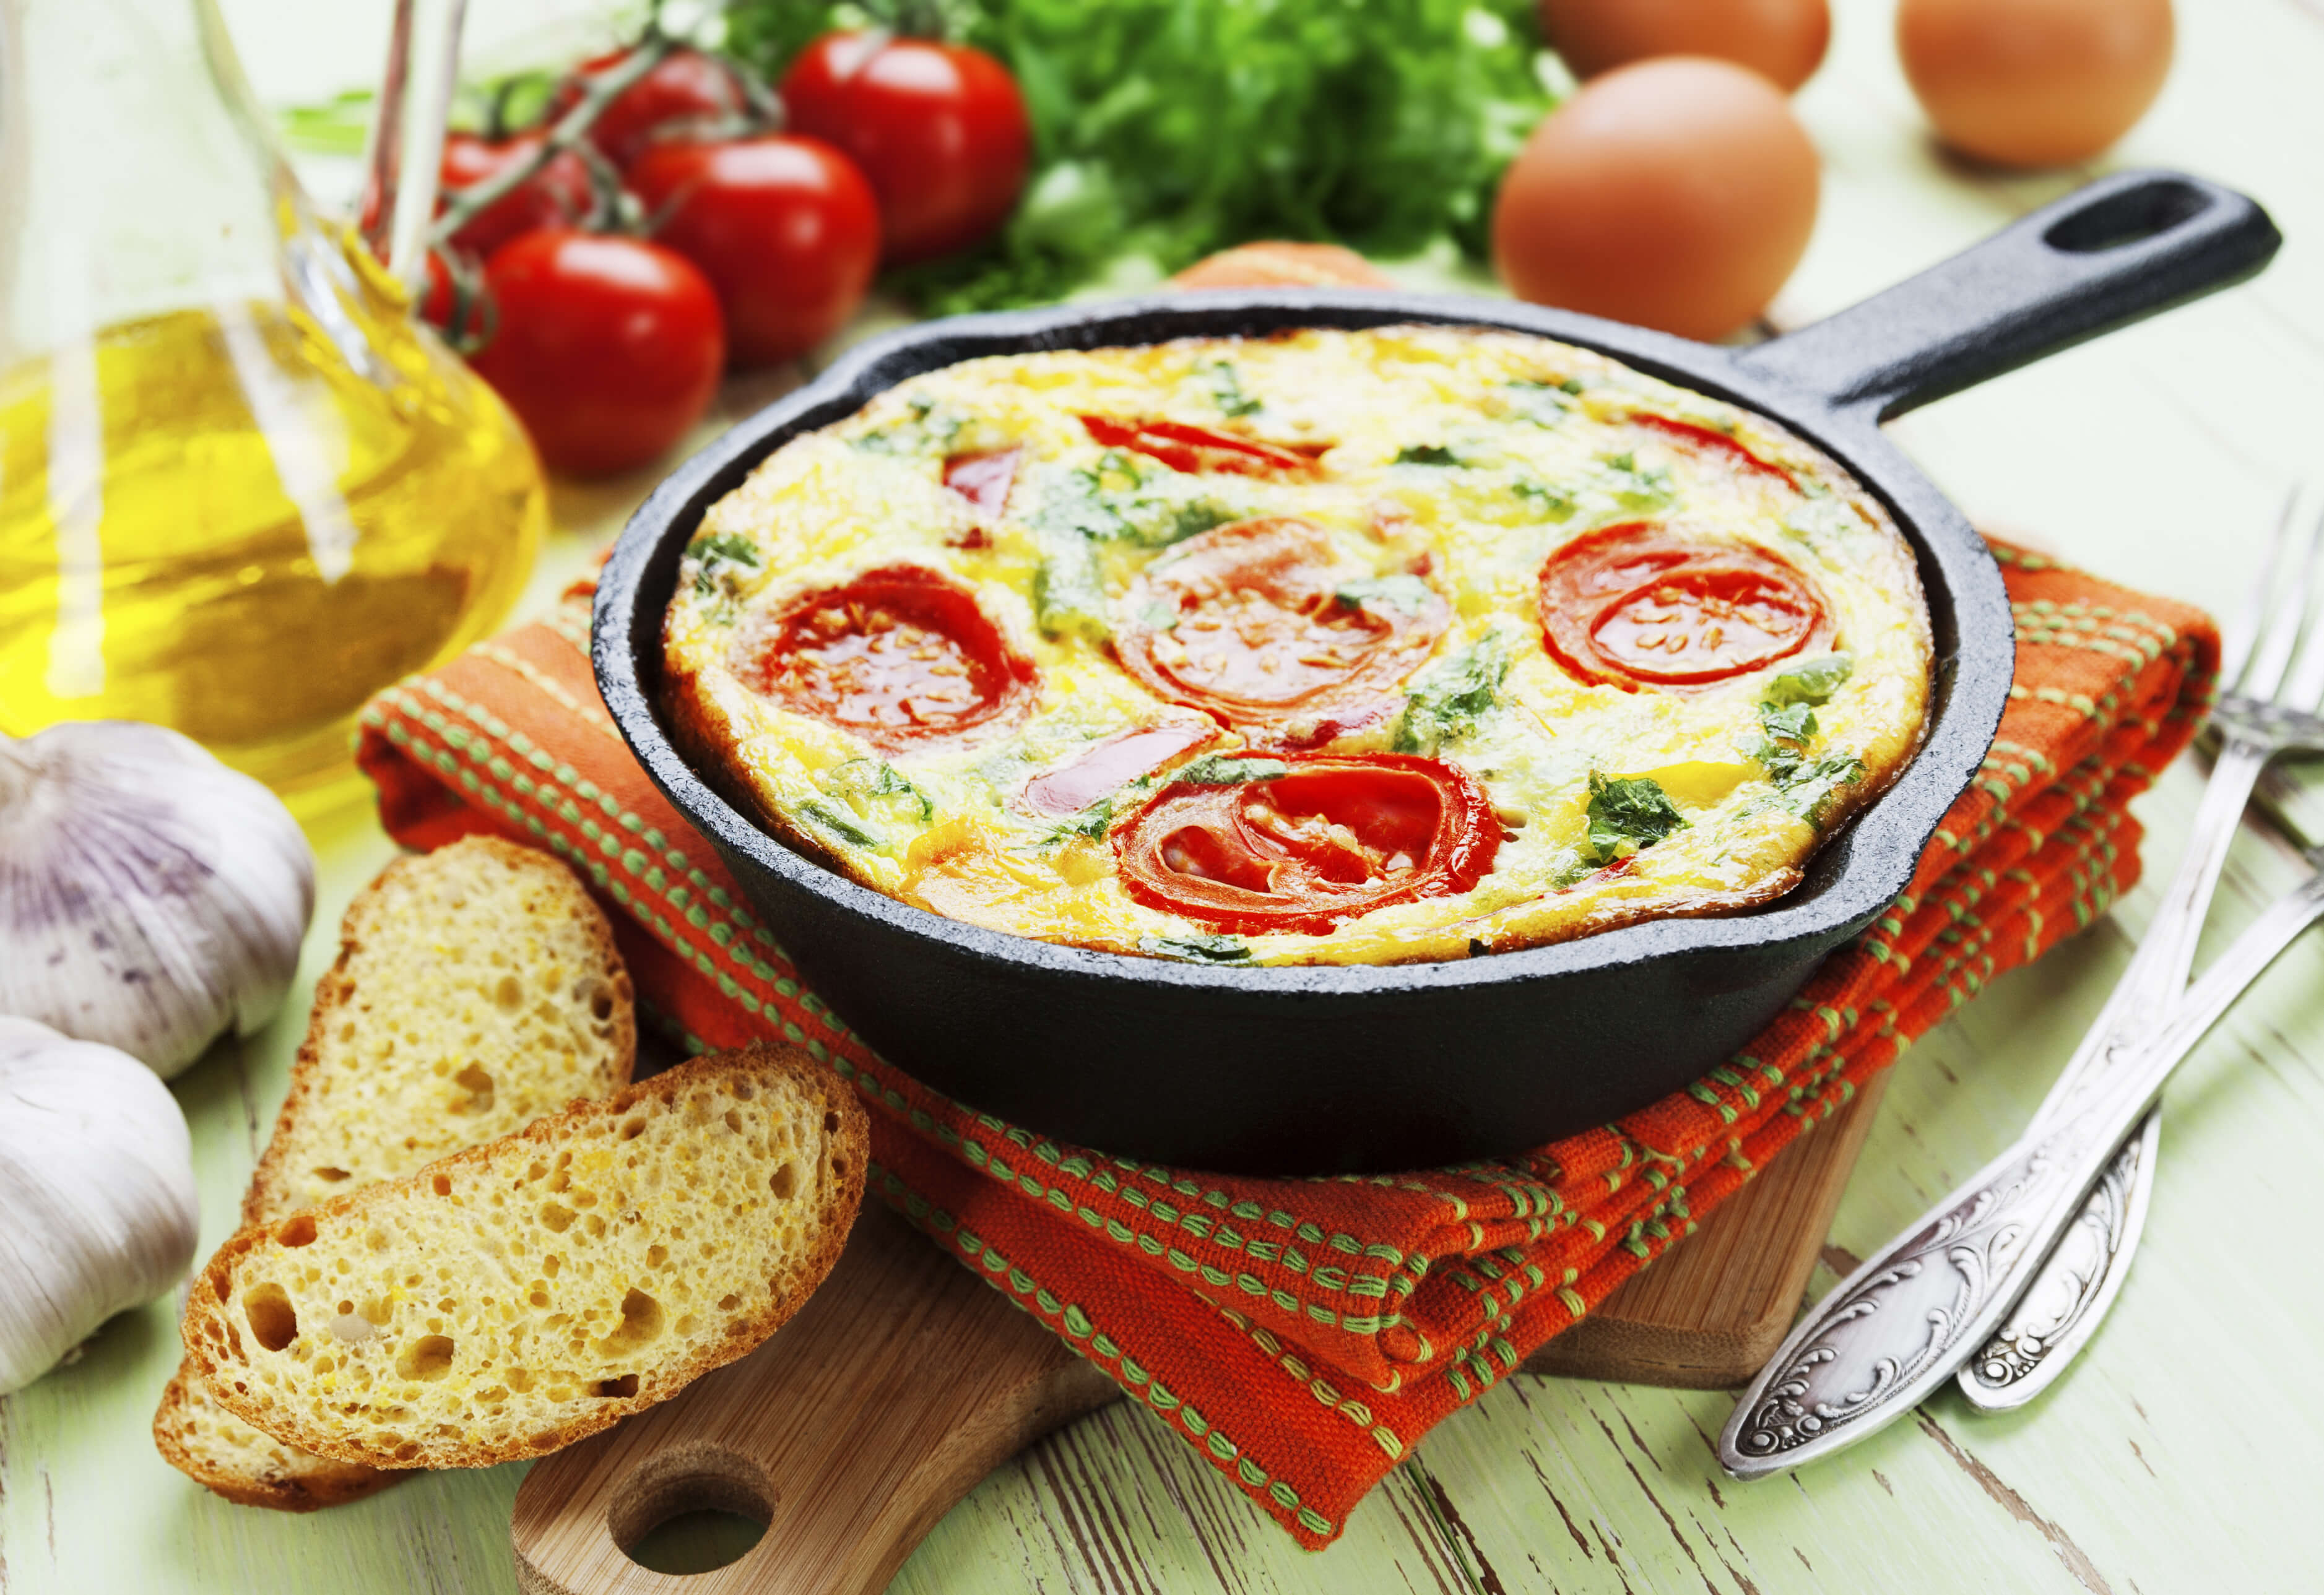 Give your omelets a theme with inspiration from your favorite cuisine.